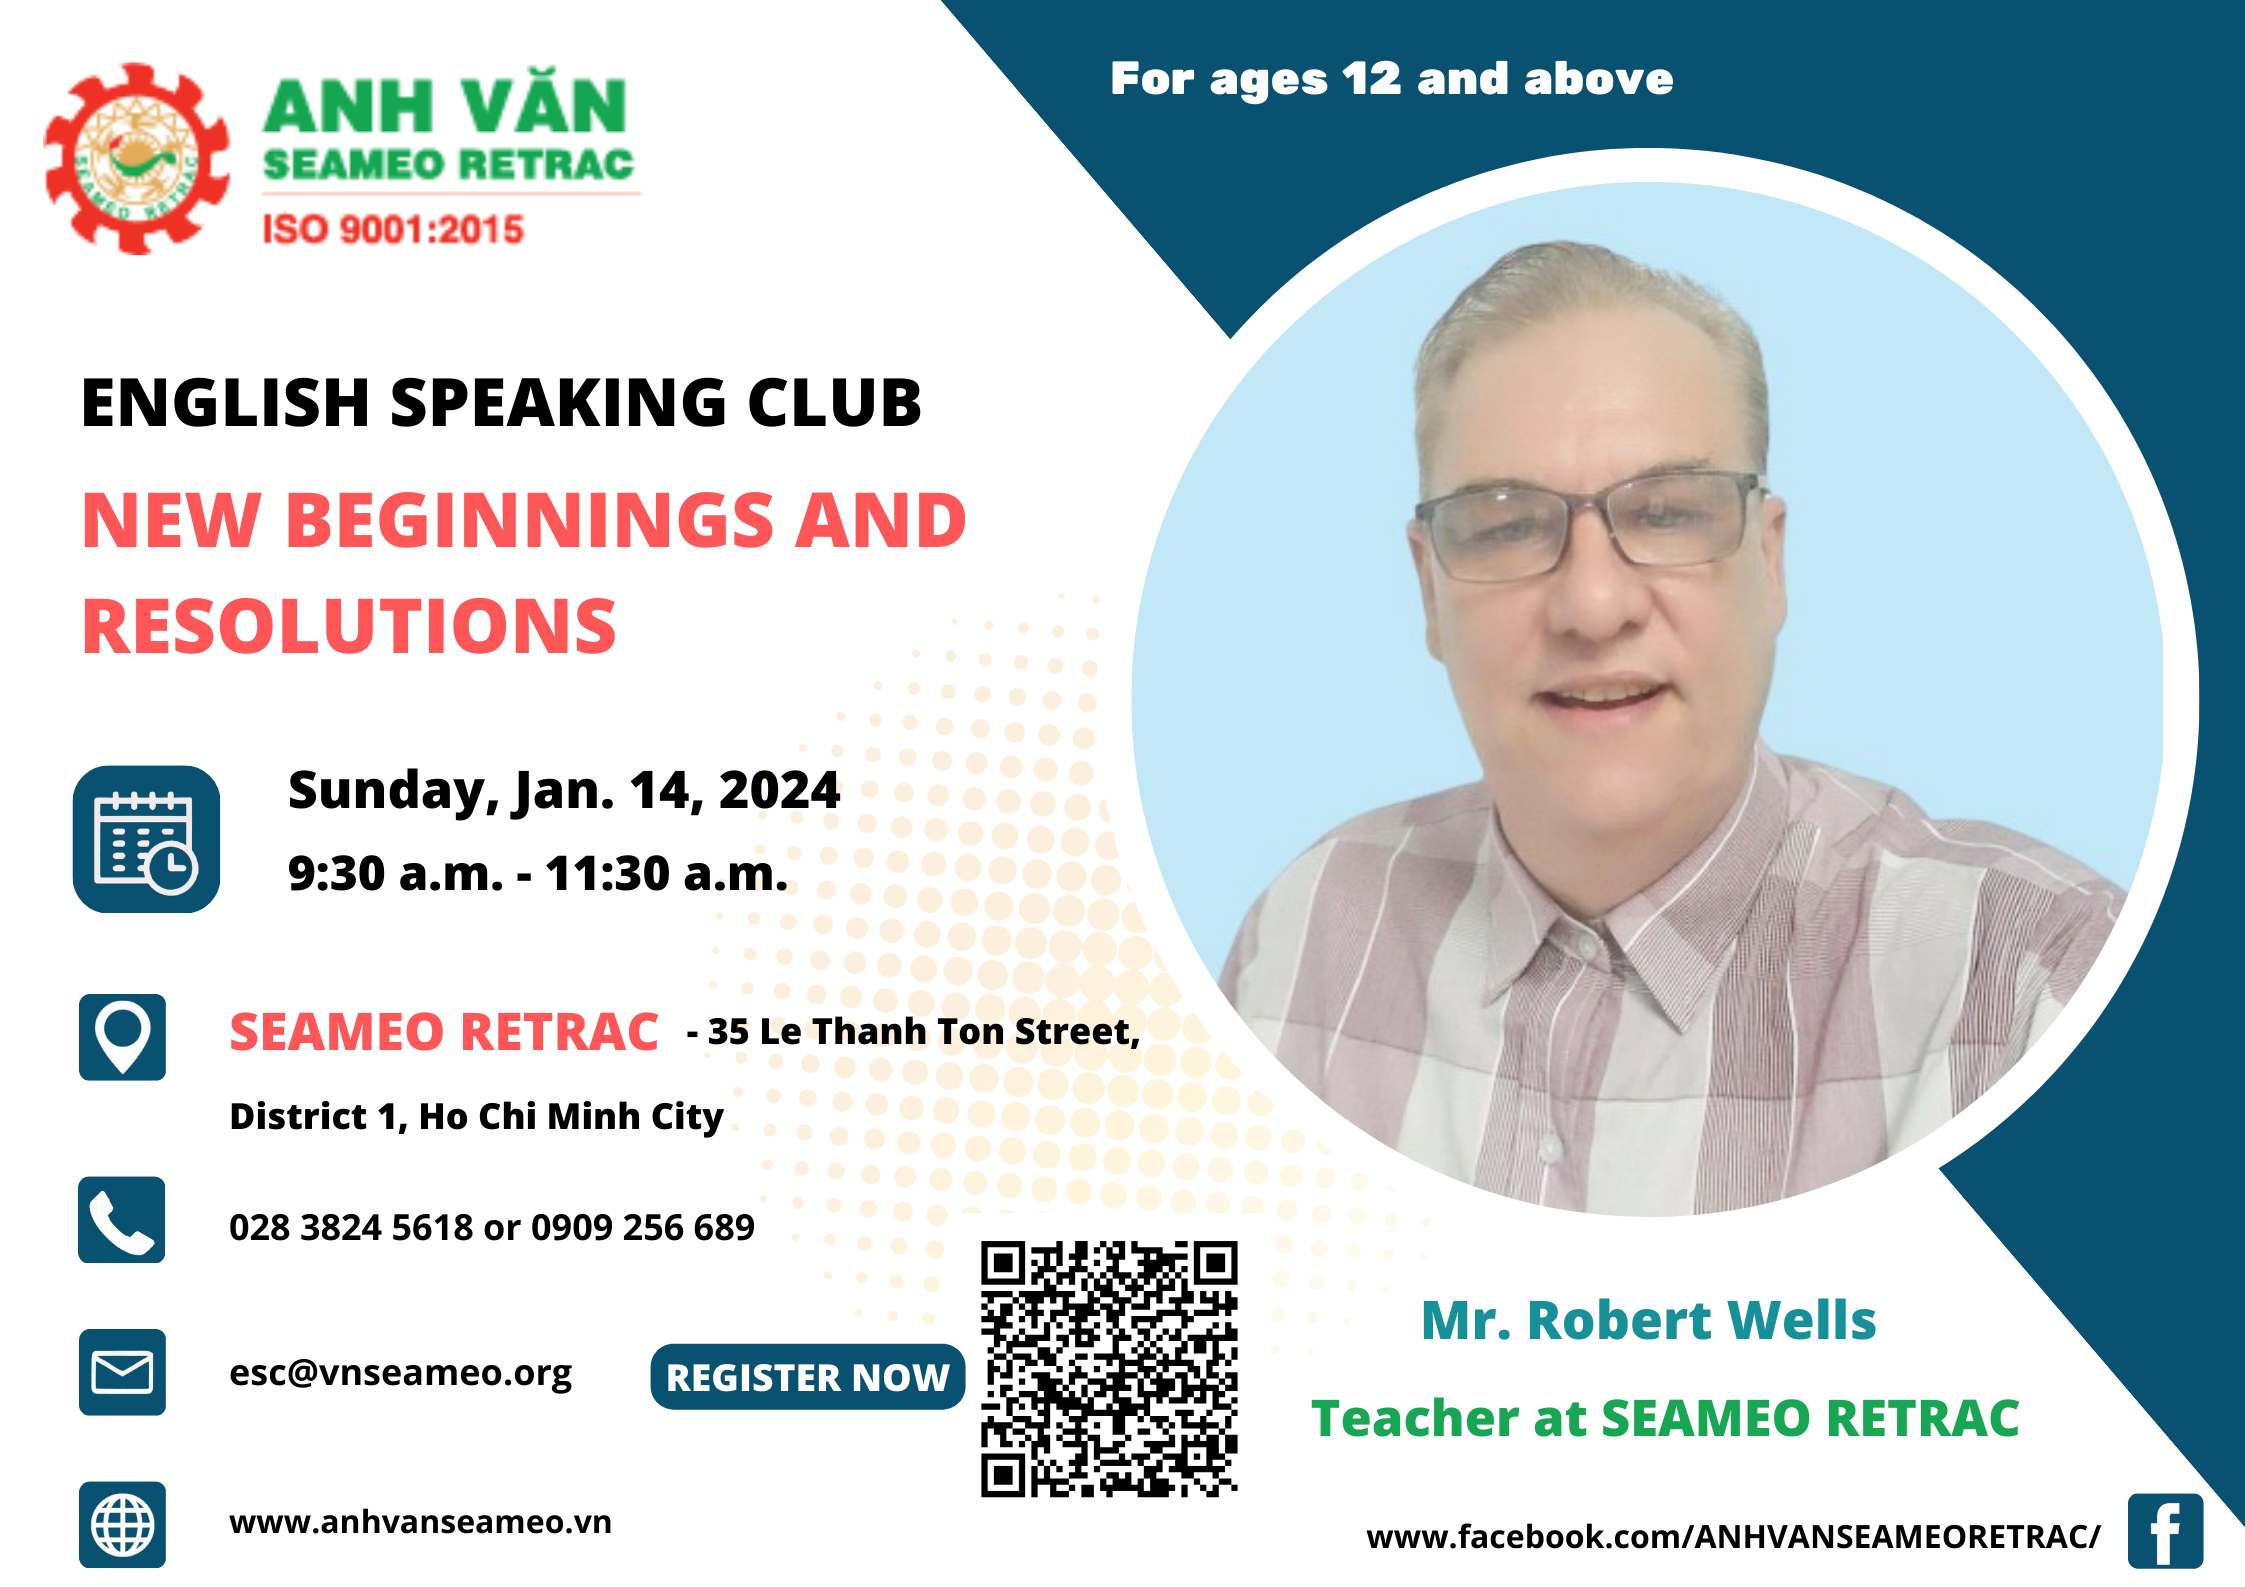 English Speaking Club: Topic: “New Beginnings and Resolutions”